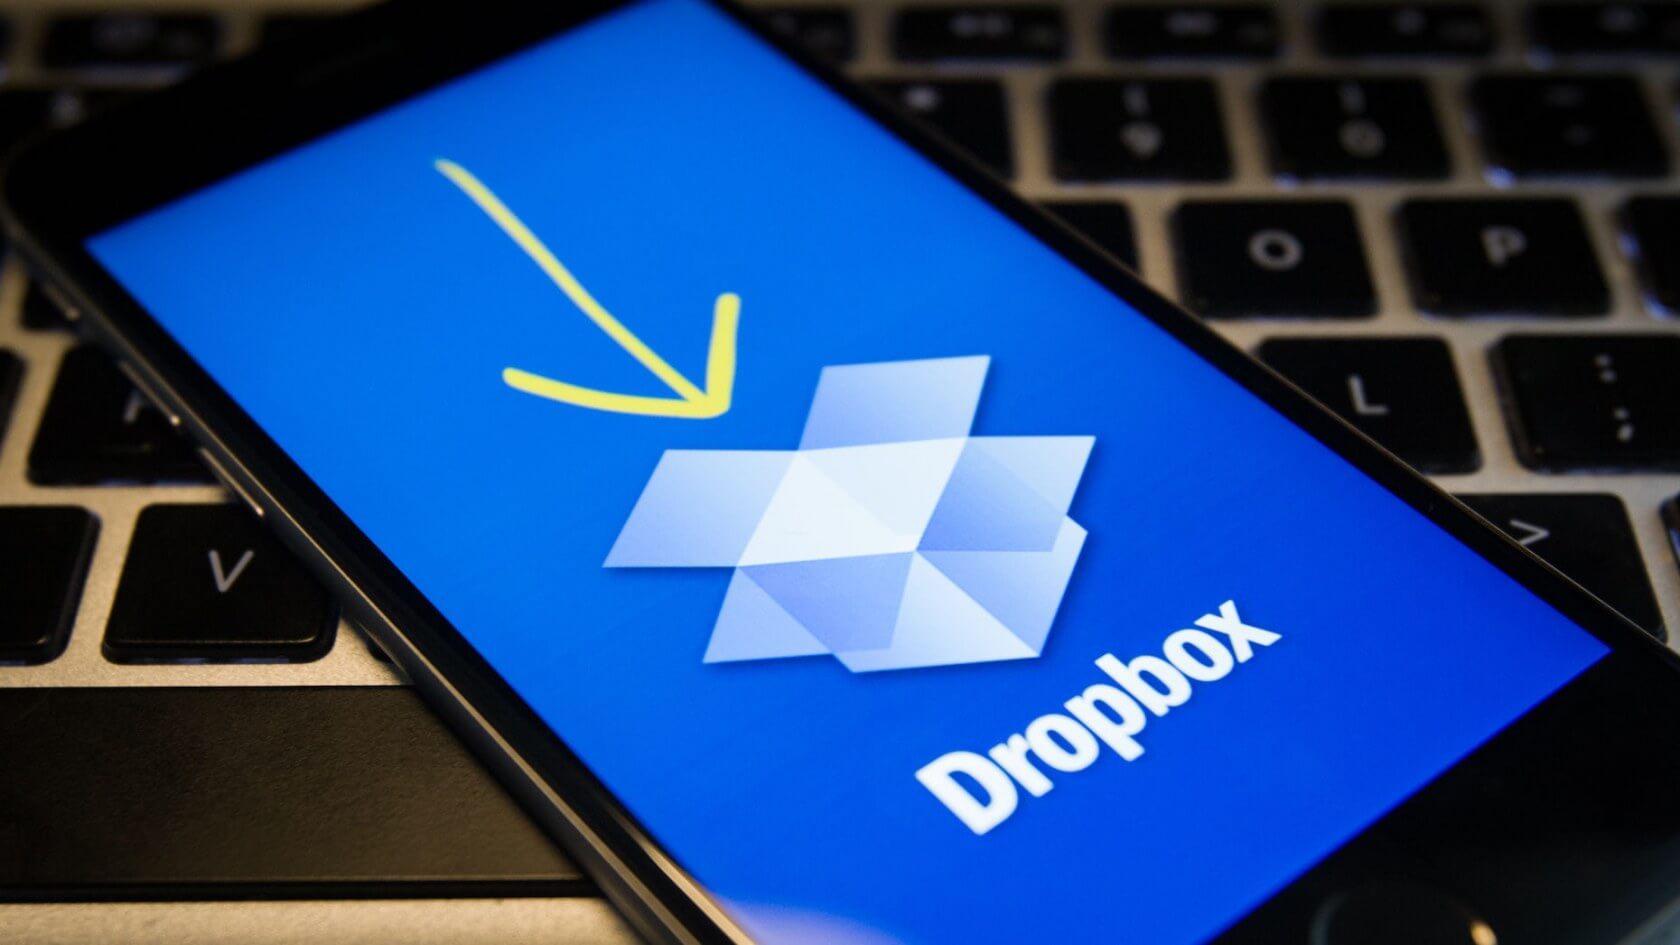 Dropbox mistakenly installed a new desktop app on user devices without notice